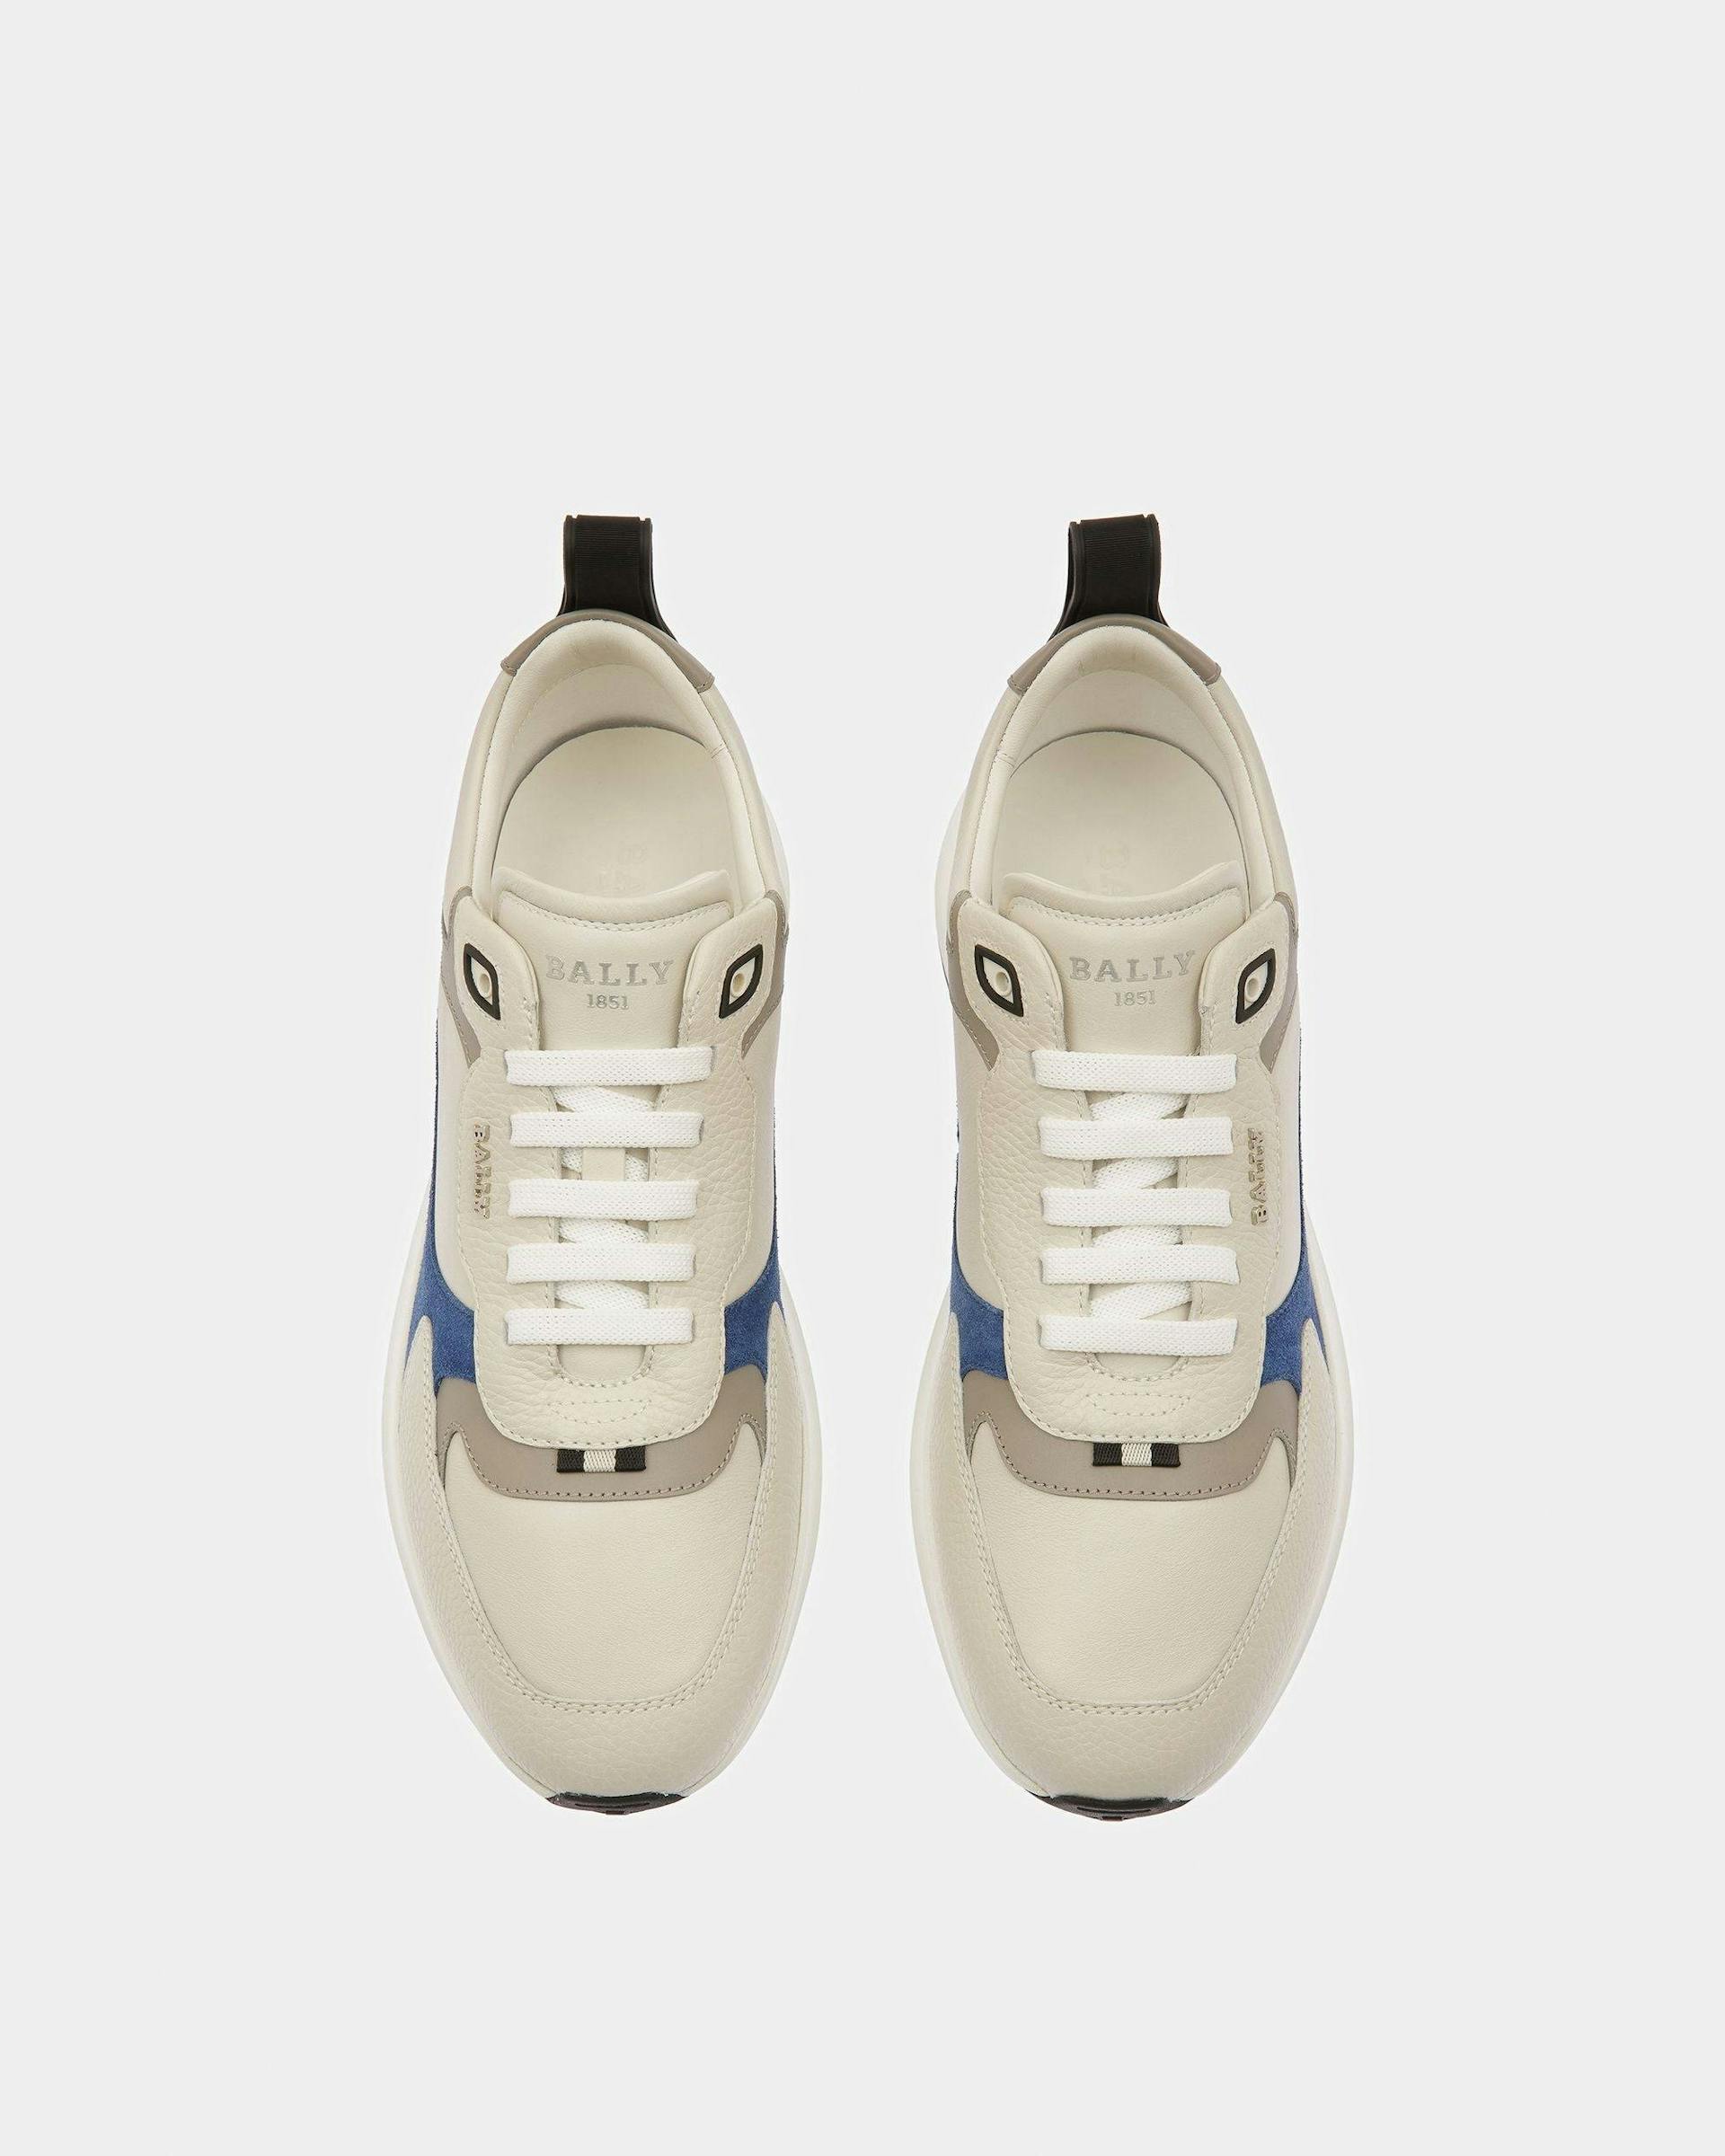 Dave Leather And Fabric Sneakers In Dusty White And Blue Neon - Men's - Bally - 02